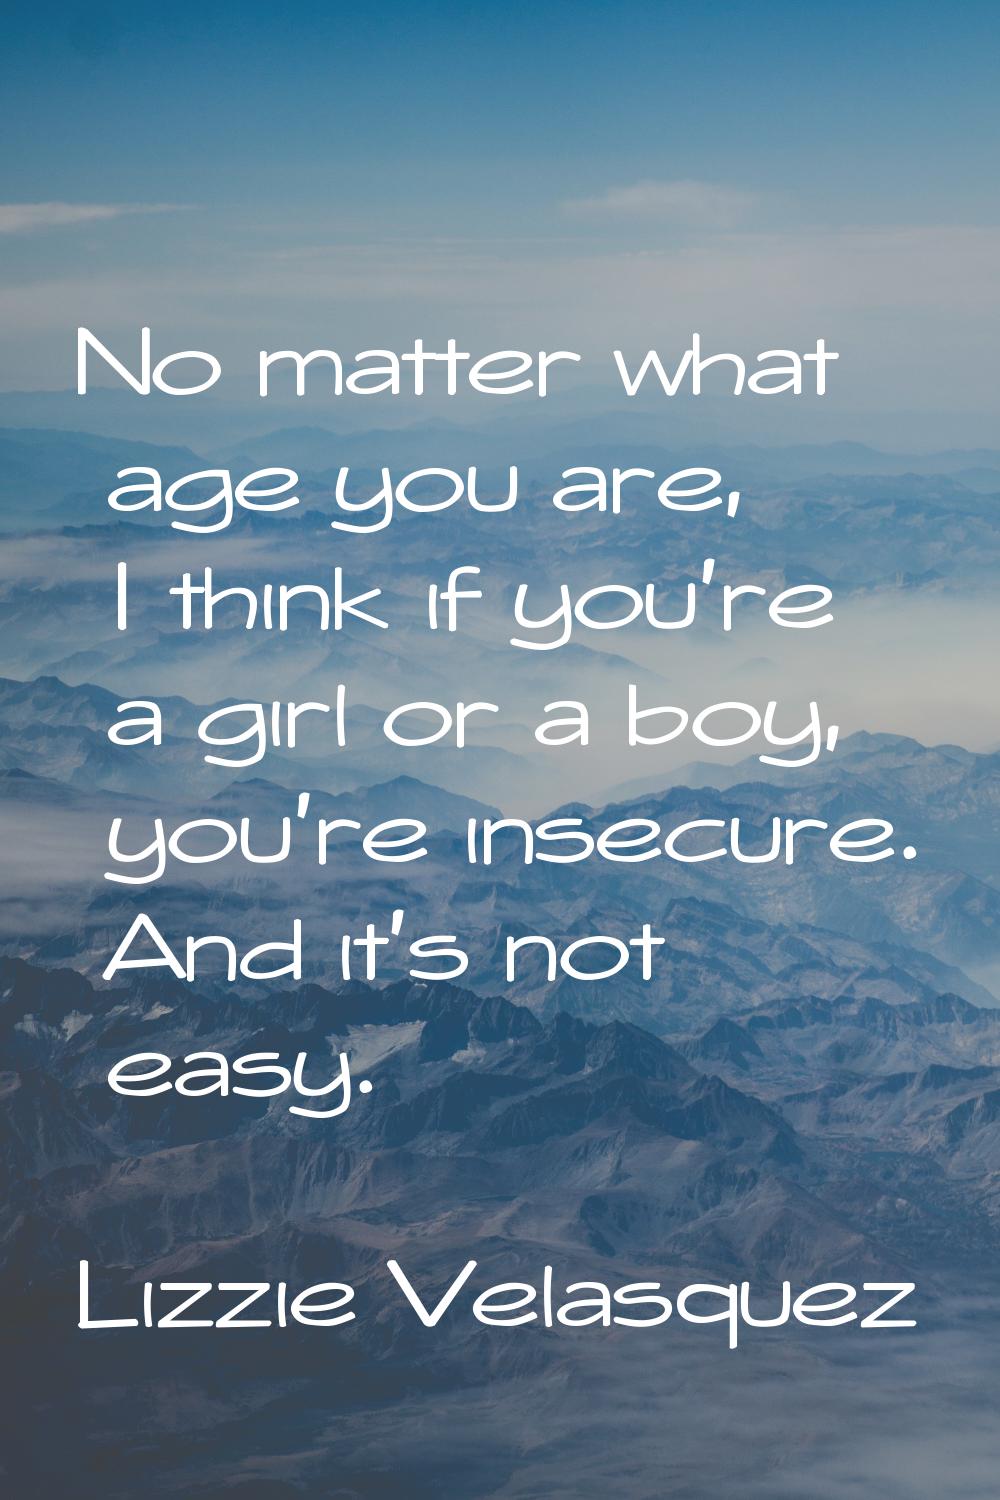 No matter what age you are, I think if you're a girl or a boy, you're insecure. And it's not easy.